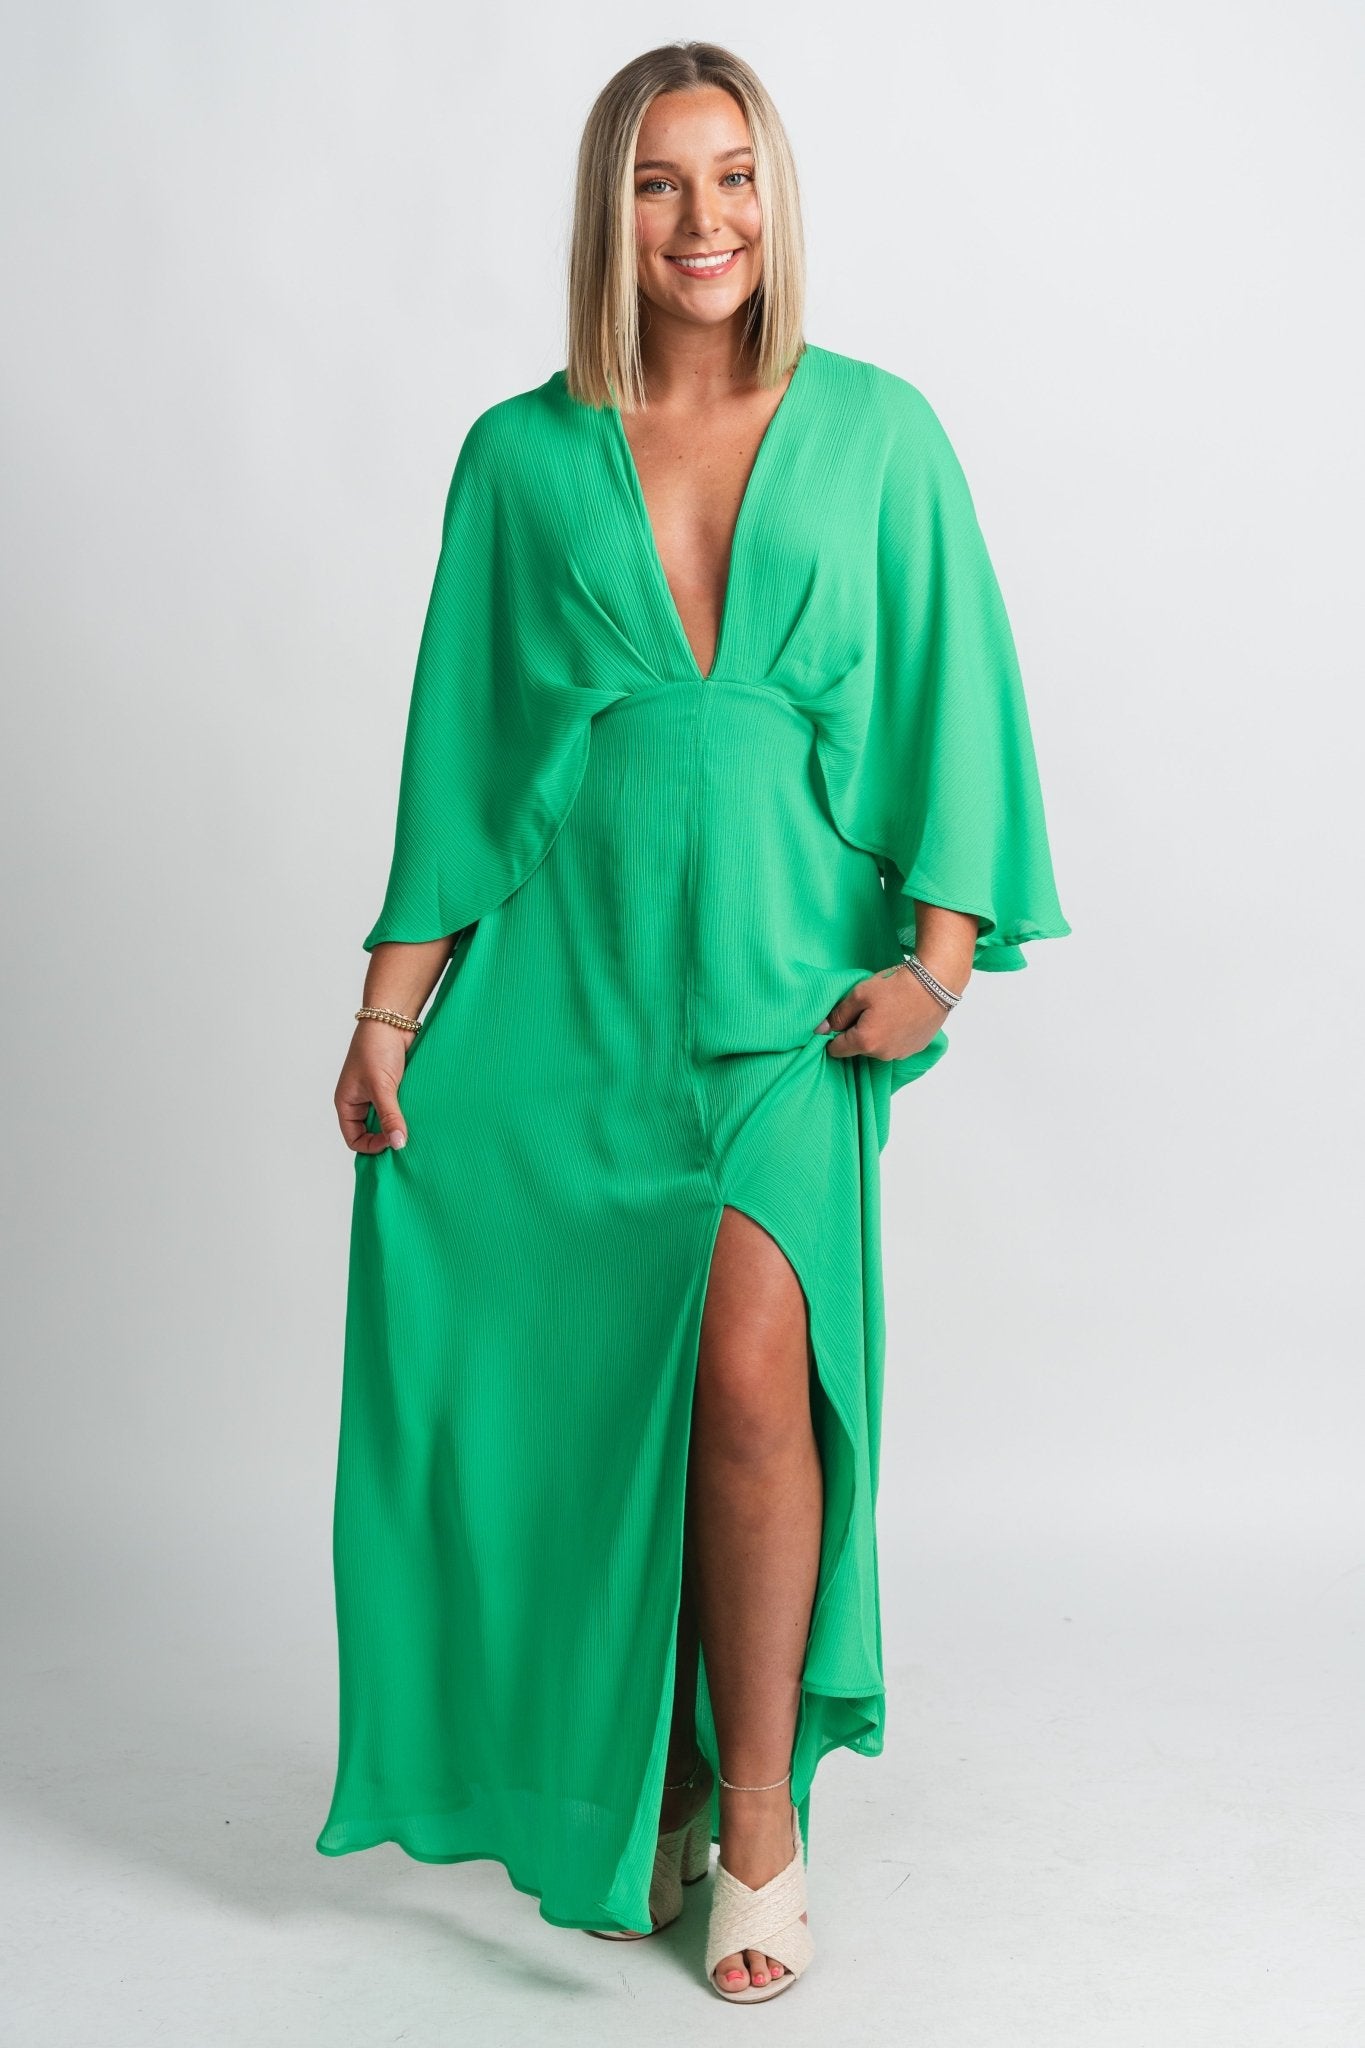 Crinkle cape maxi dress emerald - Stylish dress - Trendy Staycation Outfits at Lush Fashion Lounge Boutique in Oklahoma City